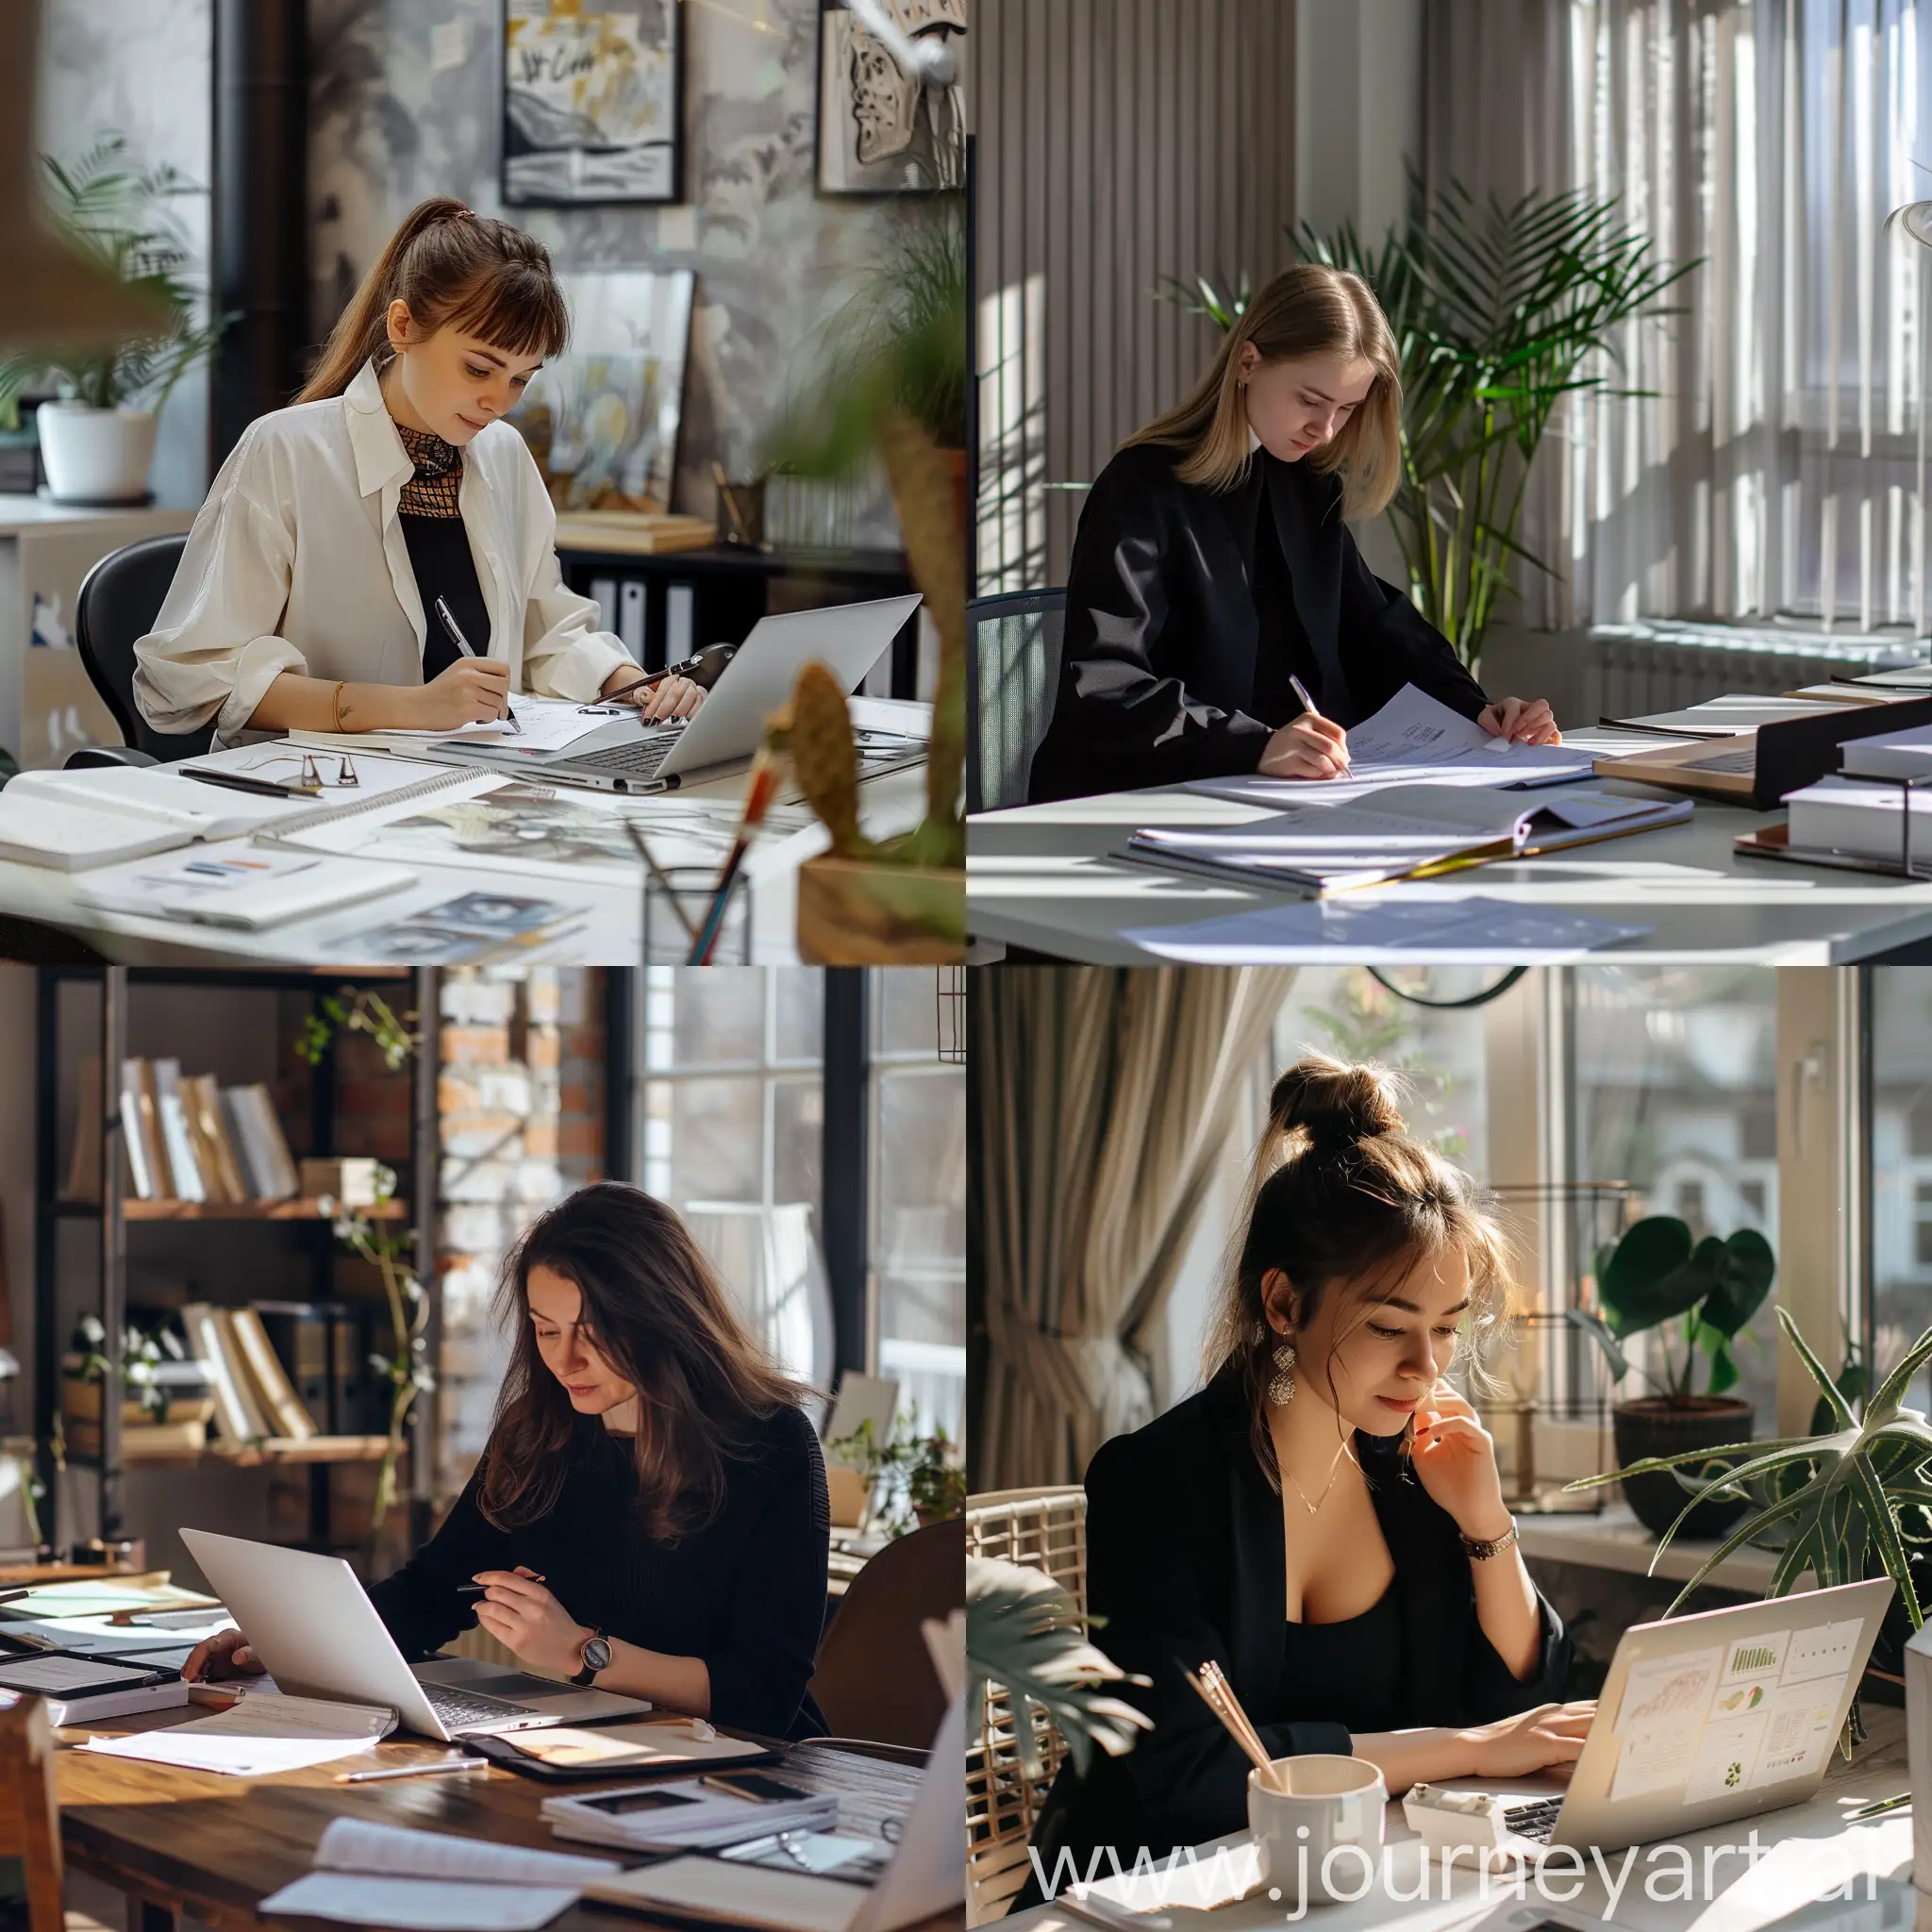 Professional-Workspace-Tatyana-Bazan-at-Work-on-the-Office-Table